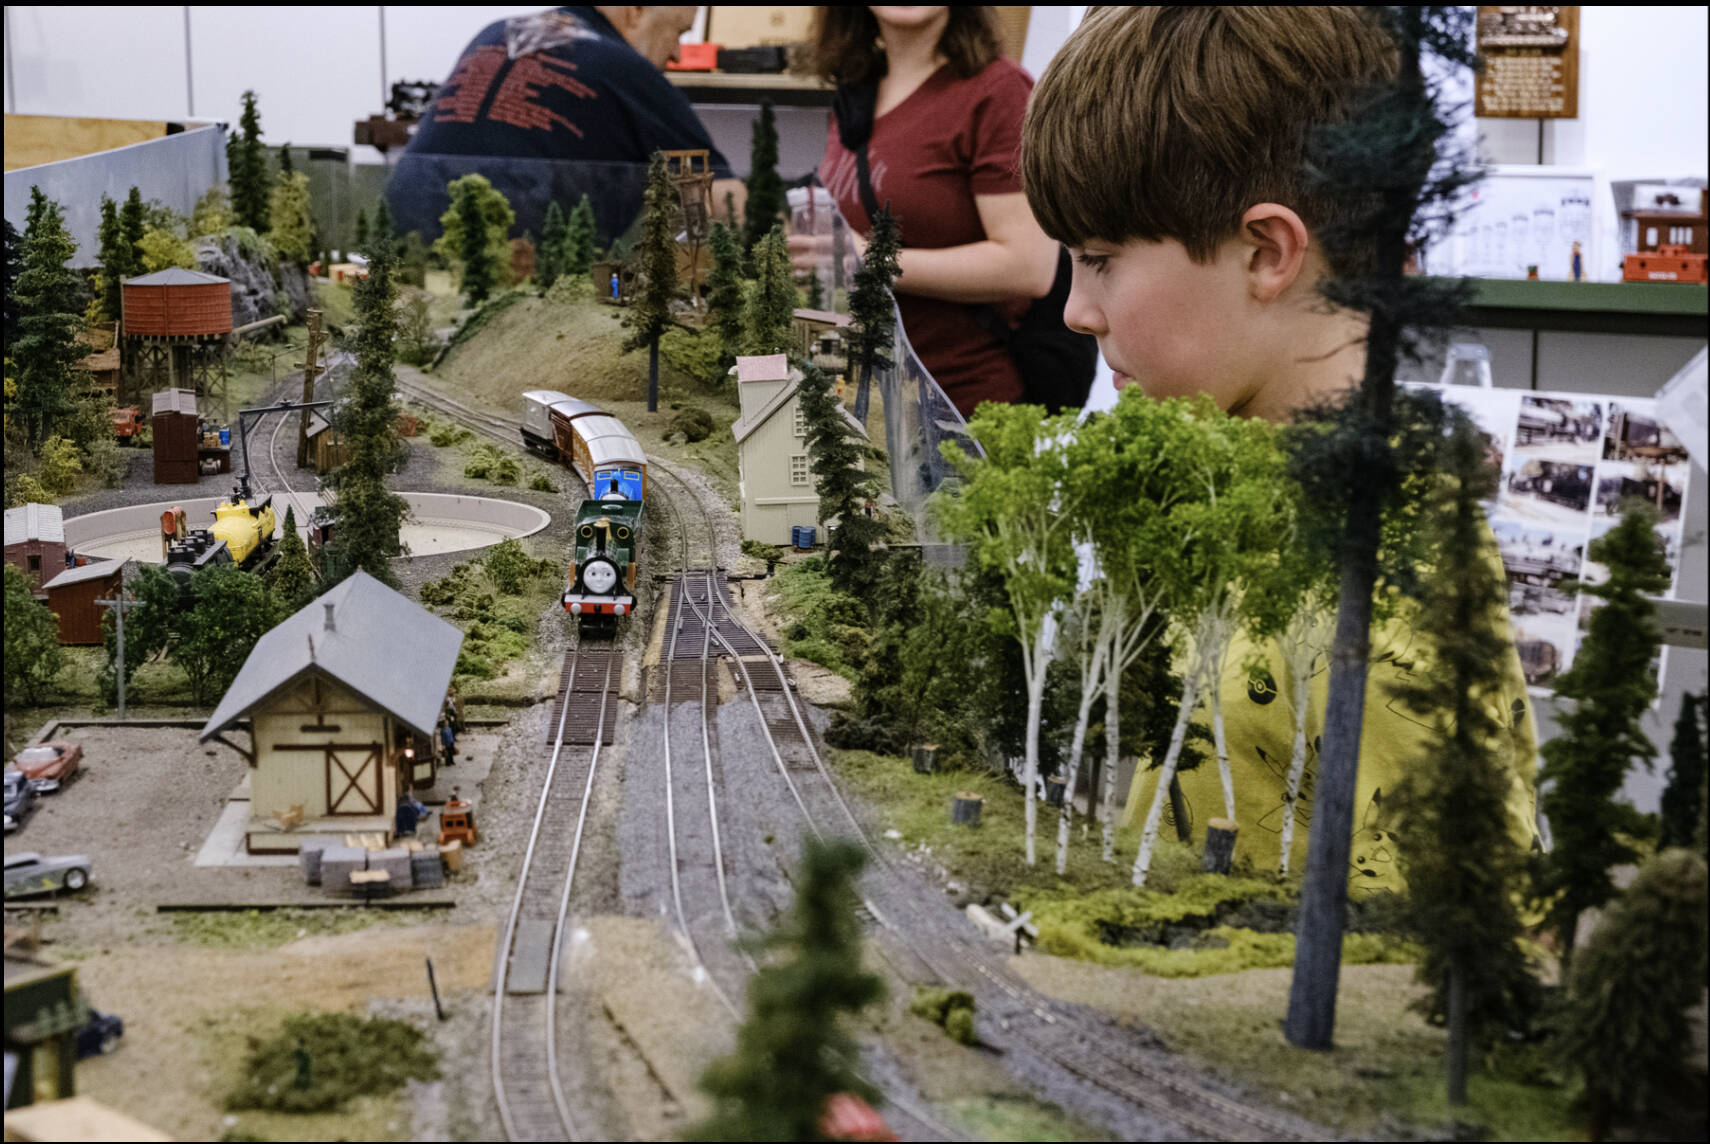 Damon Williams/Kitsap News Group Photos
Kids of all ages enjoy watching the model trains.